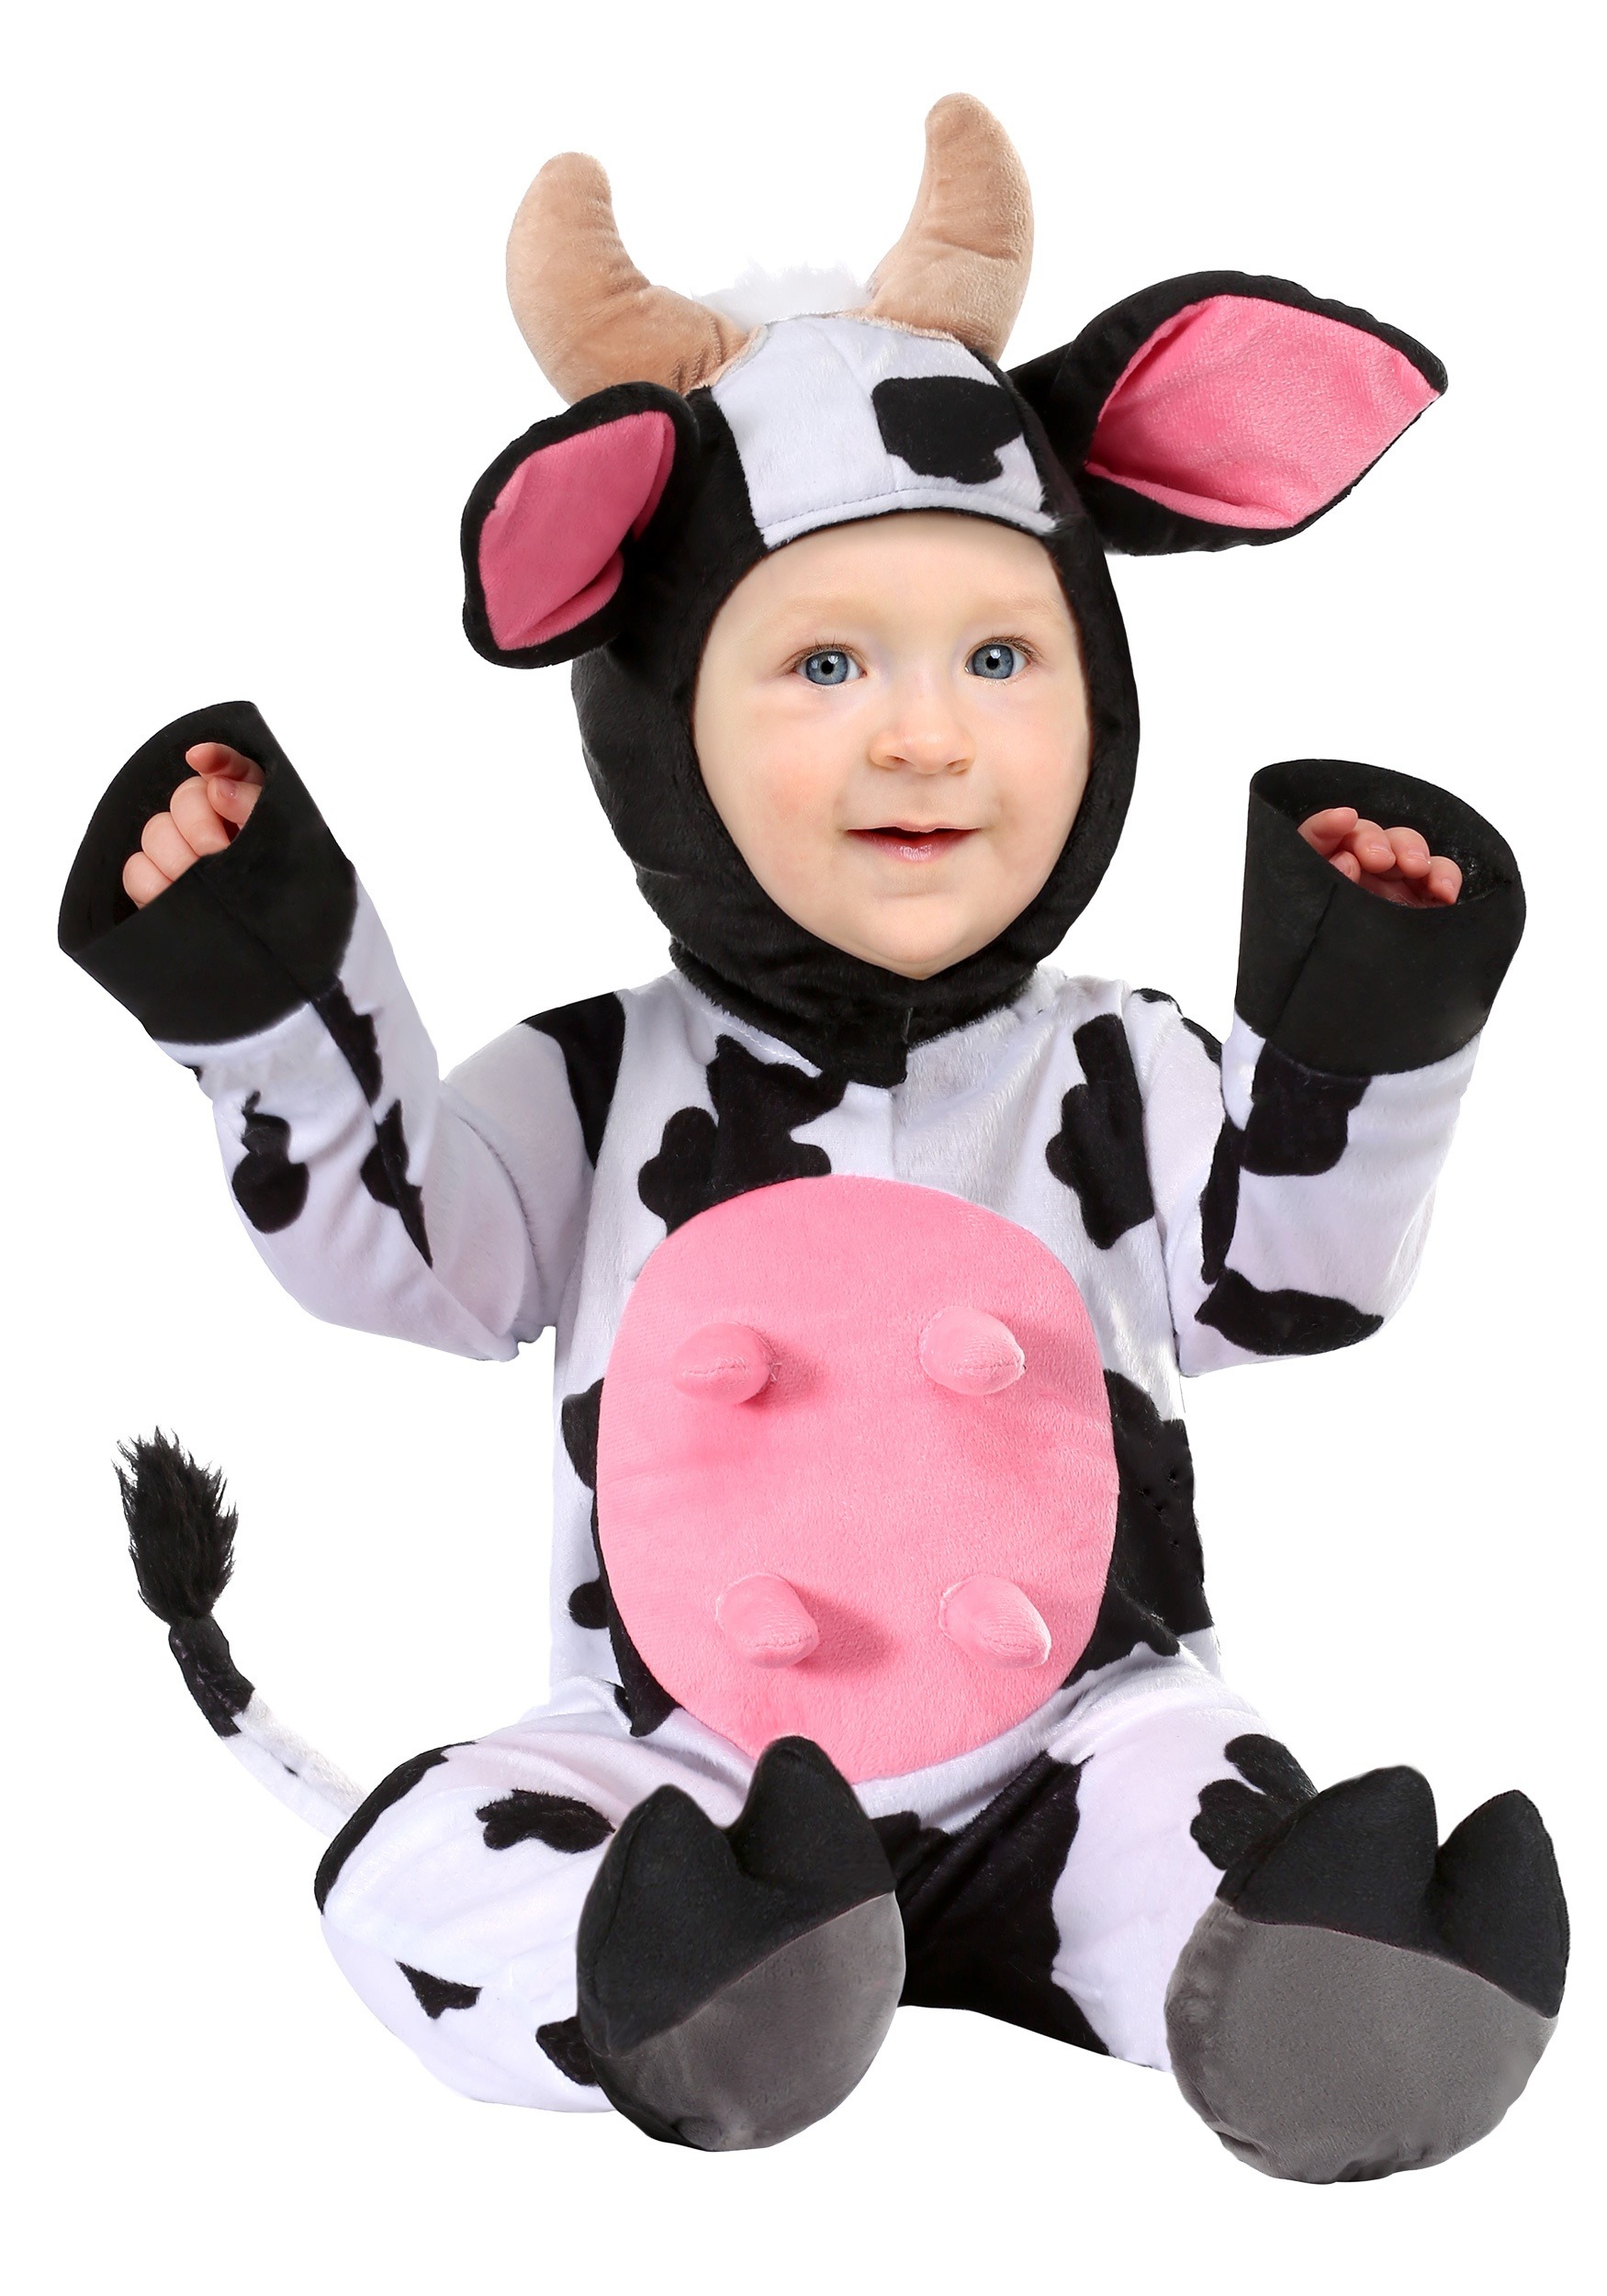 Photos - Fancy Dress Happy Cow FUN Costumes  Costume for Infant Black/Pink/White FUN1249 